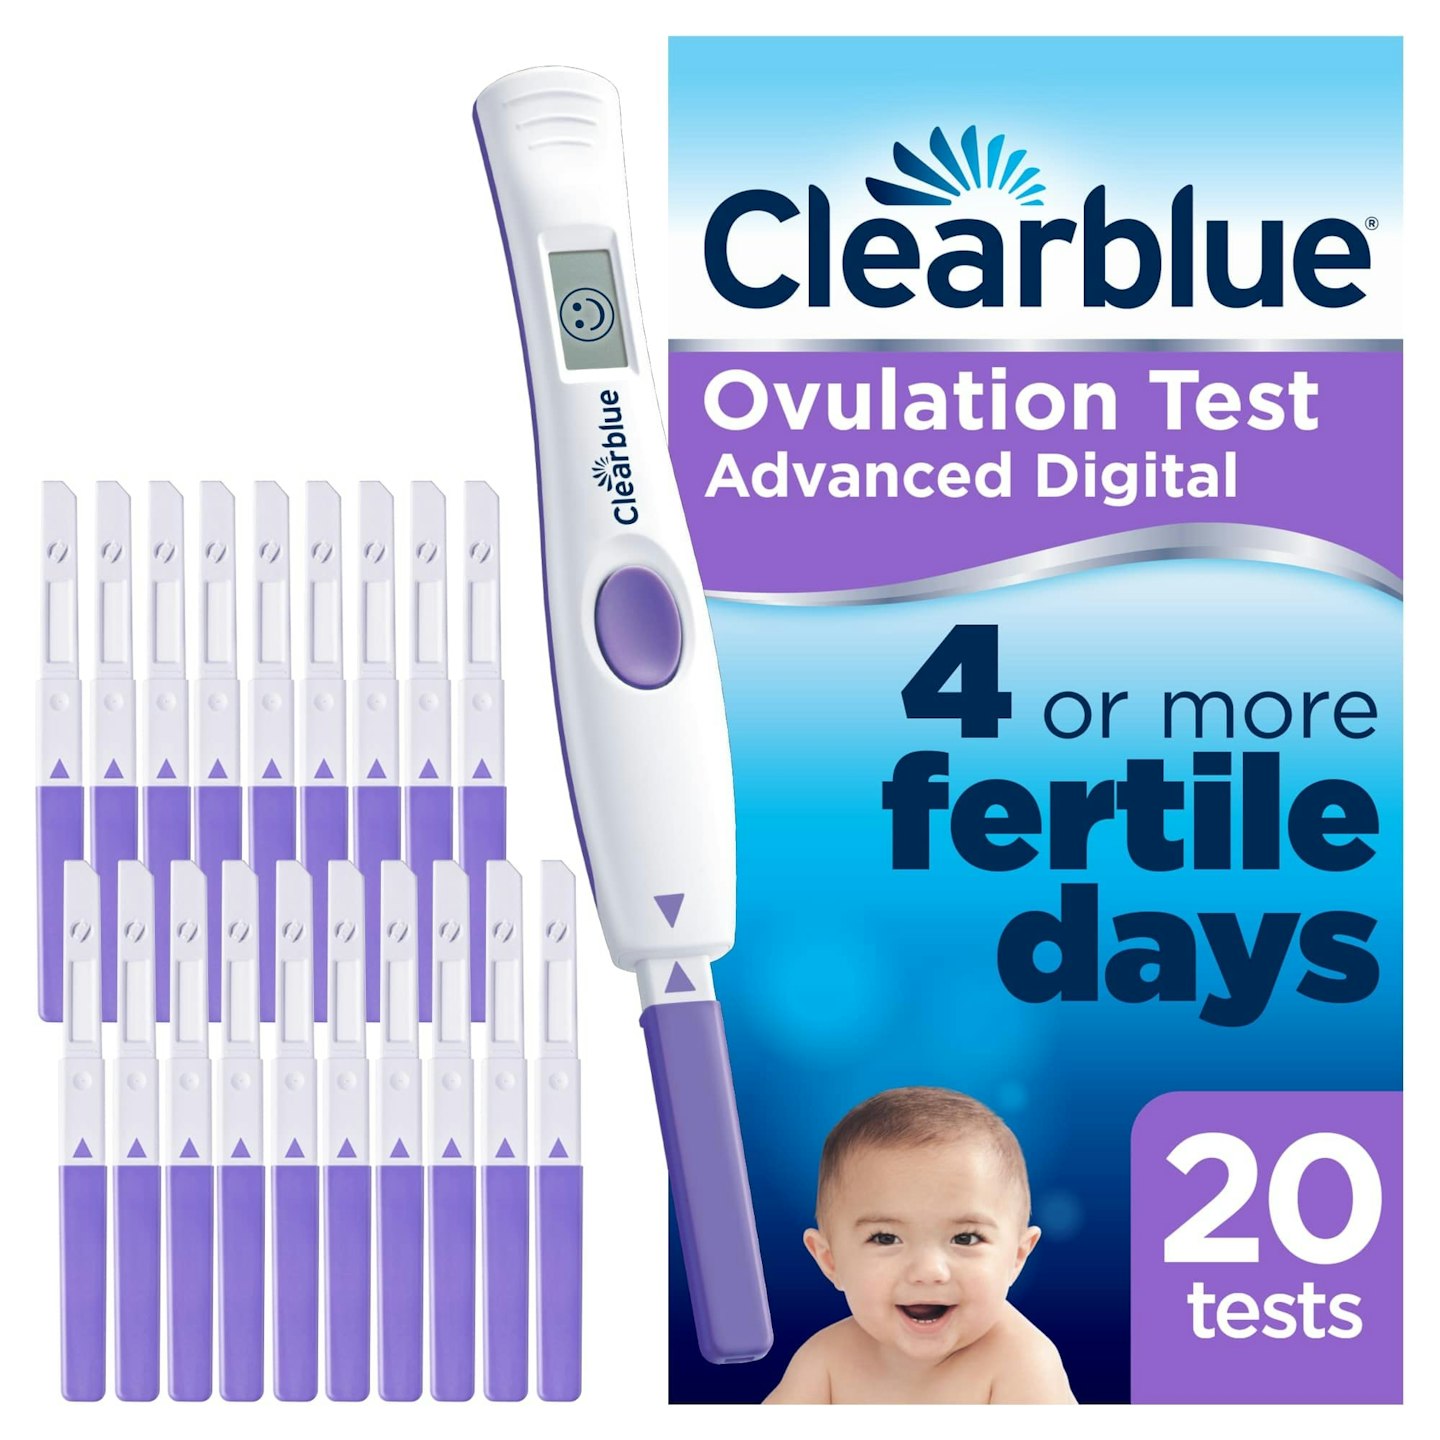 Fairhaven Health Fertile Focus Ovulation Test Kit - Women's Fertility  Tracker and Predictor - 3 Days in Advance - Ovulation Kit - Accurate,  Reusable